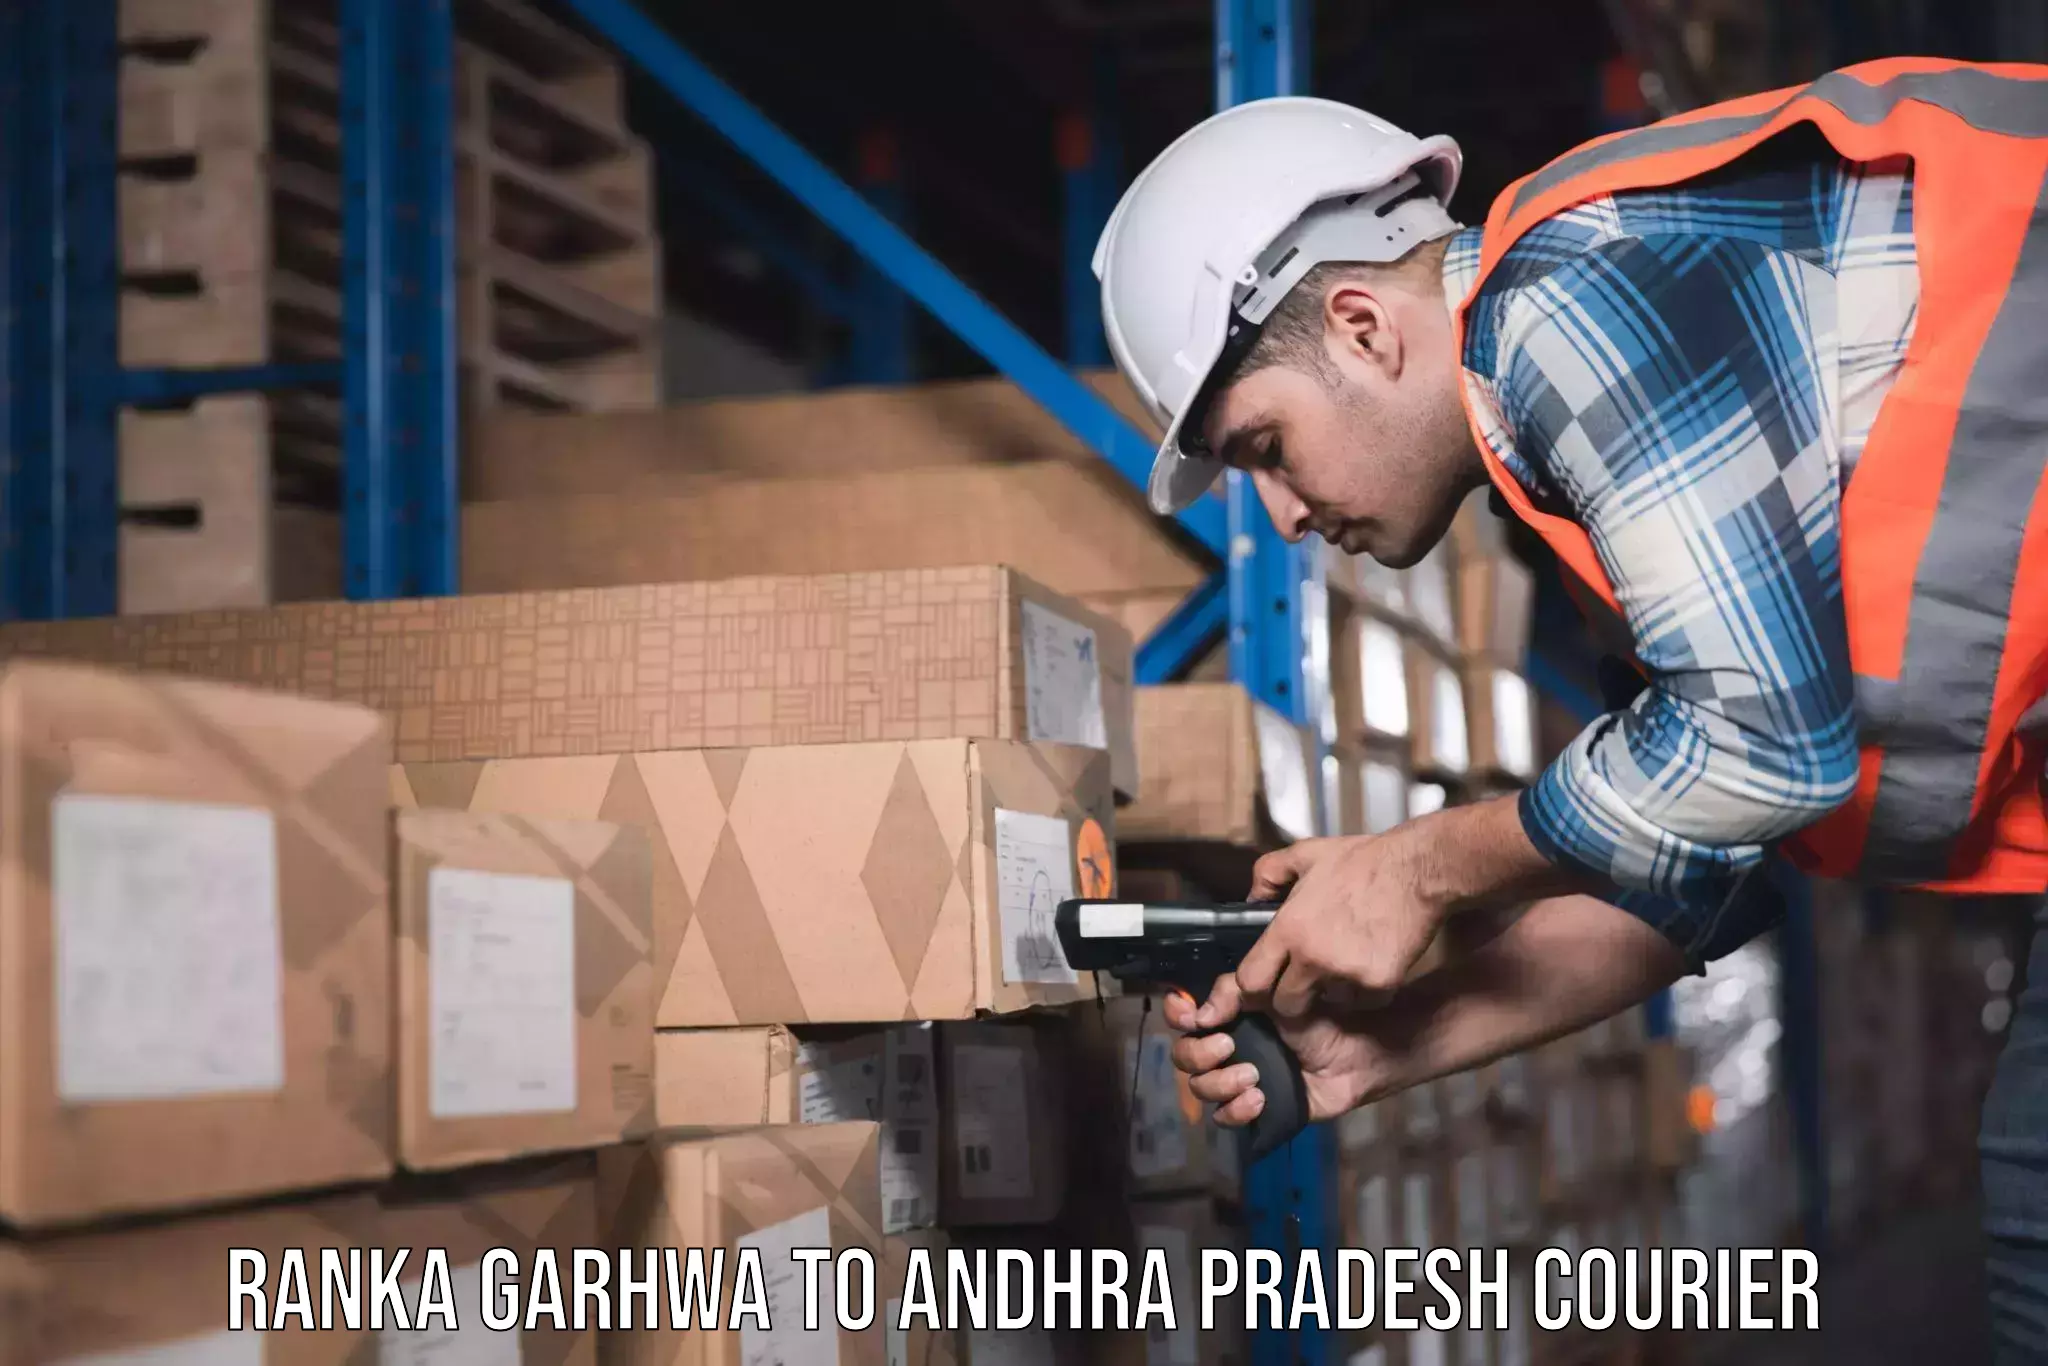 Specialized moving company Ranka Garhwa to Parchoor